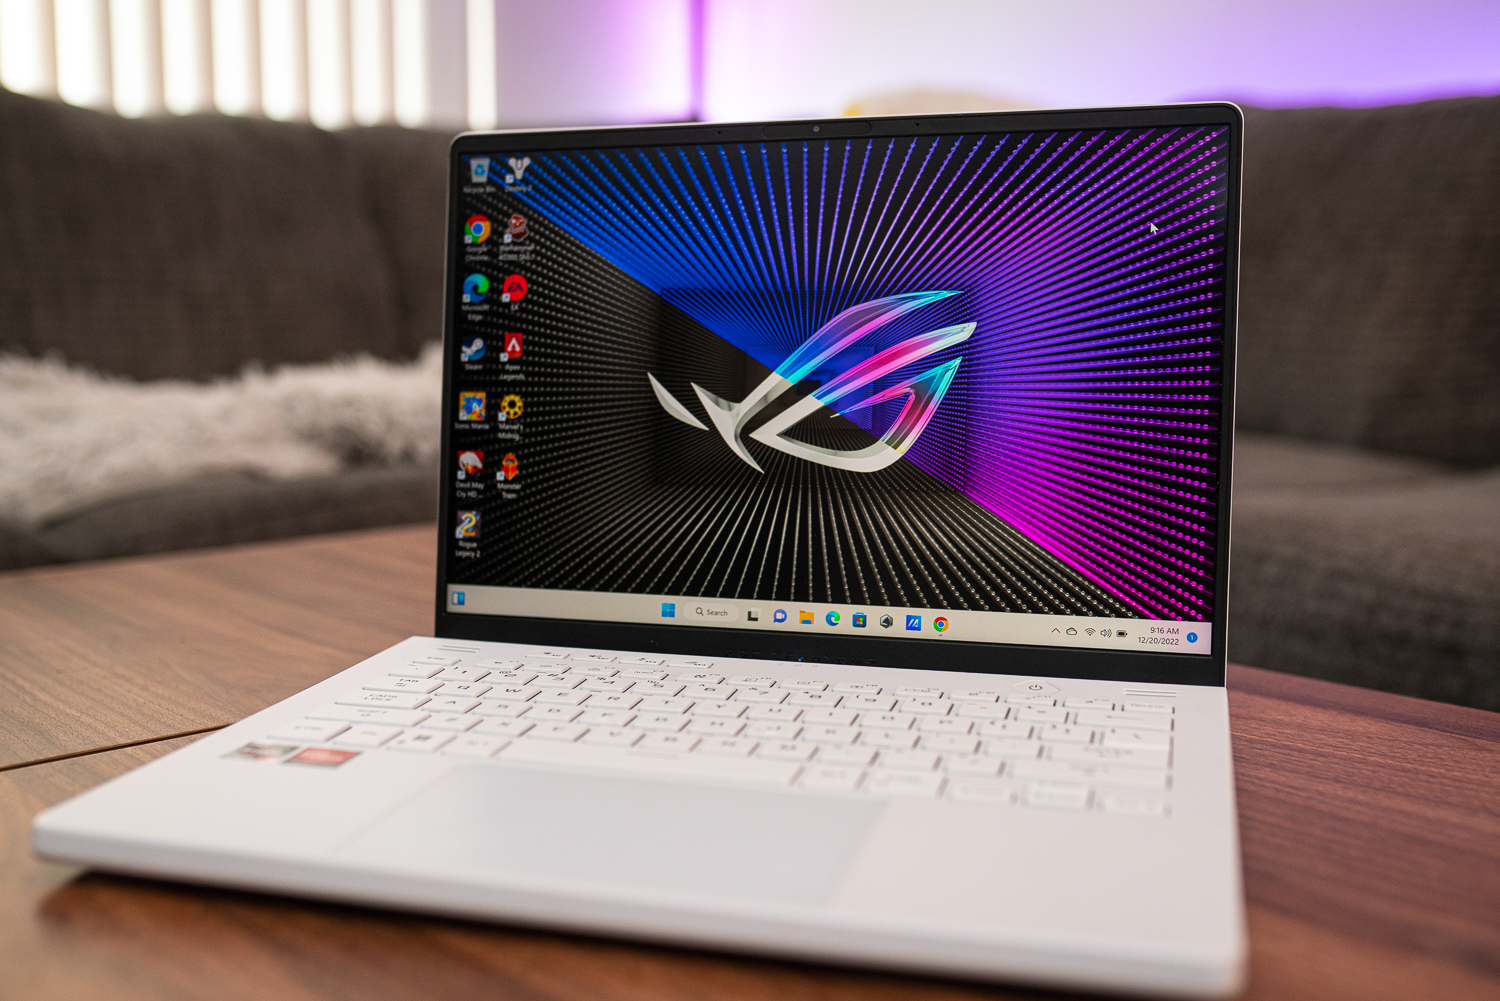 This Asus gaming laptop is discounted from $1,430 to $900